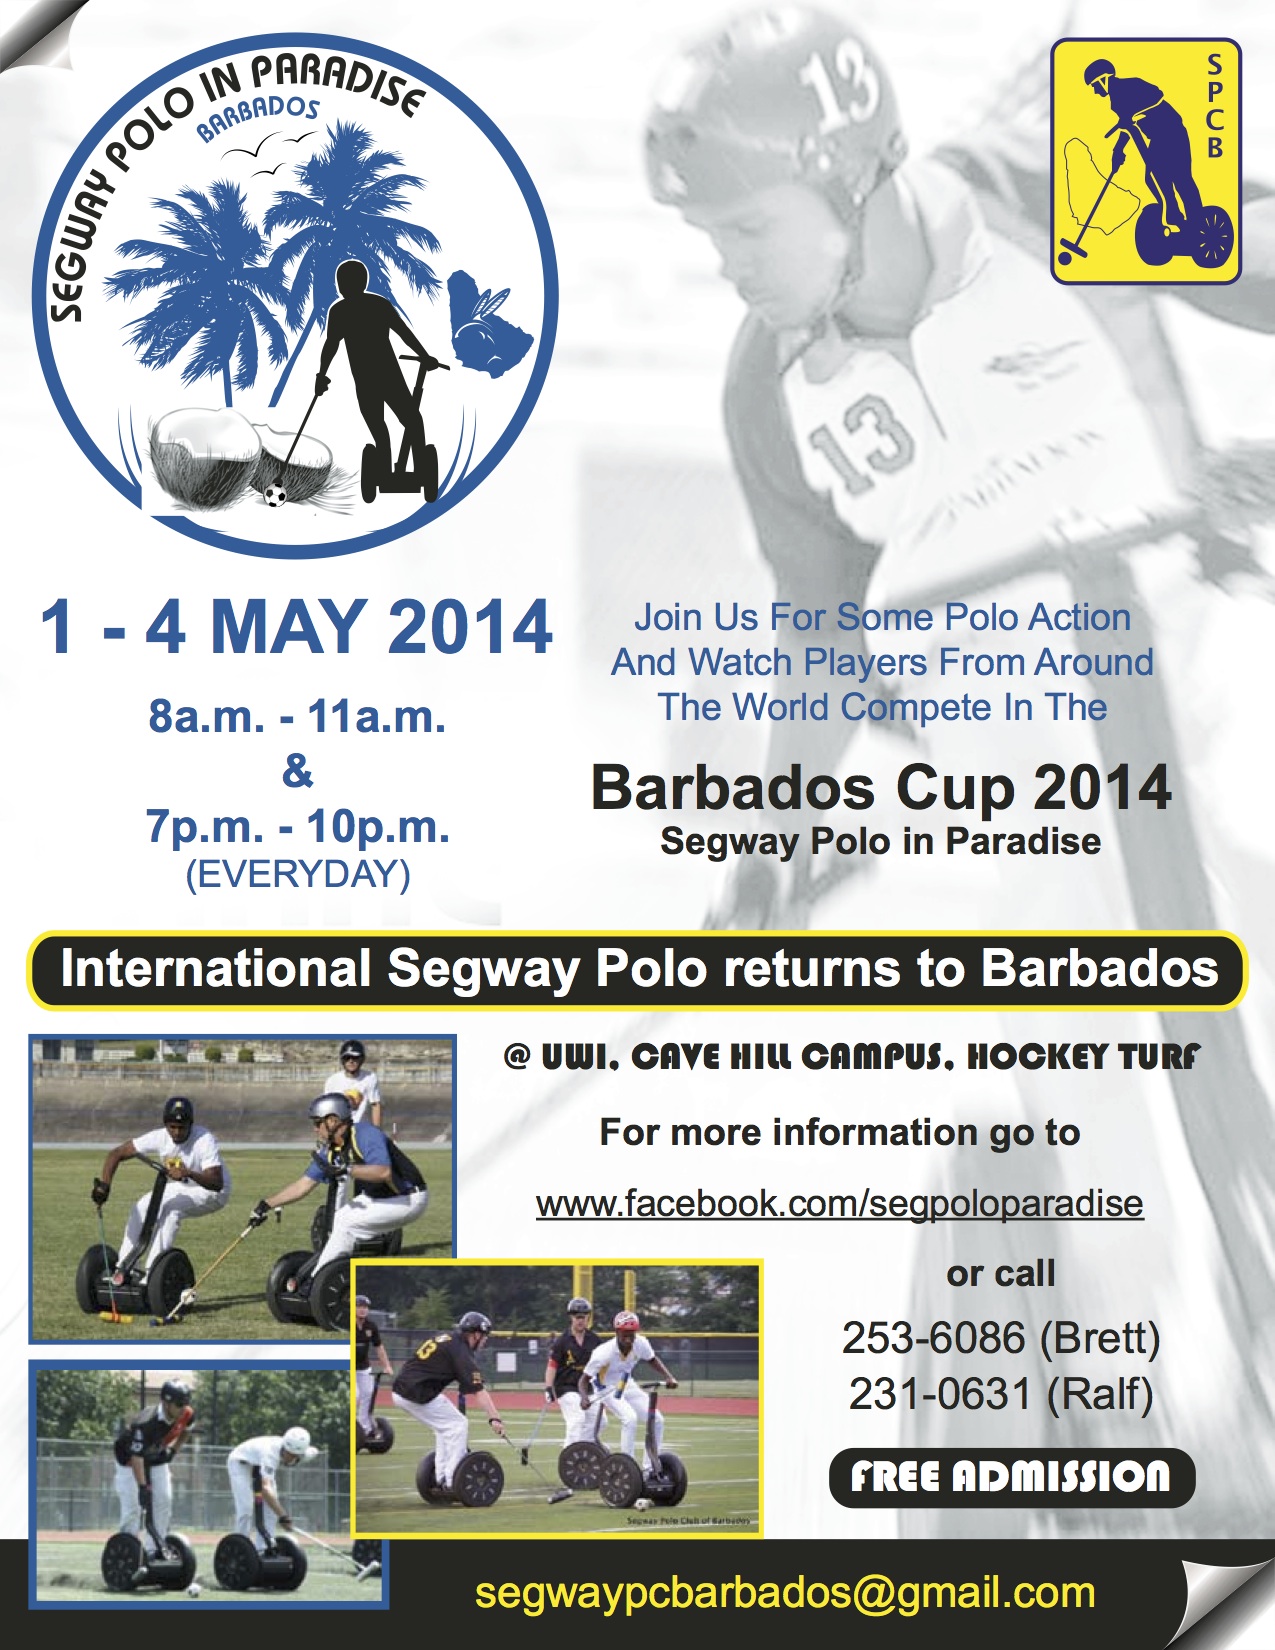 Segway Polo in Paradise - Barbados Cup 2014